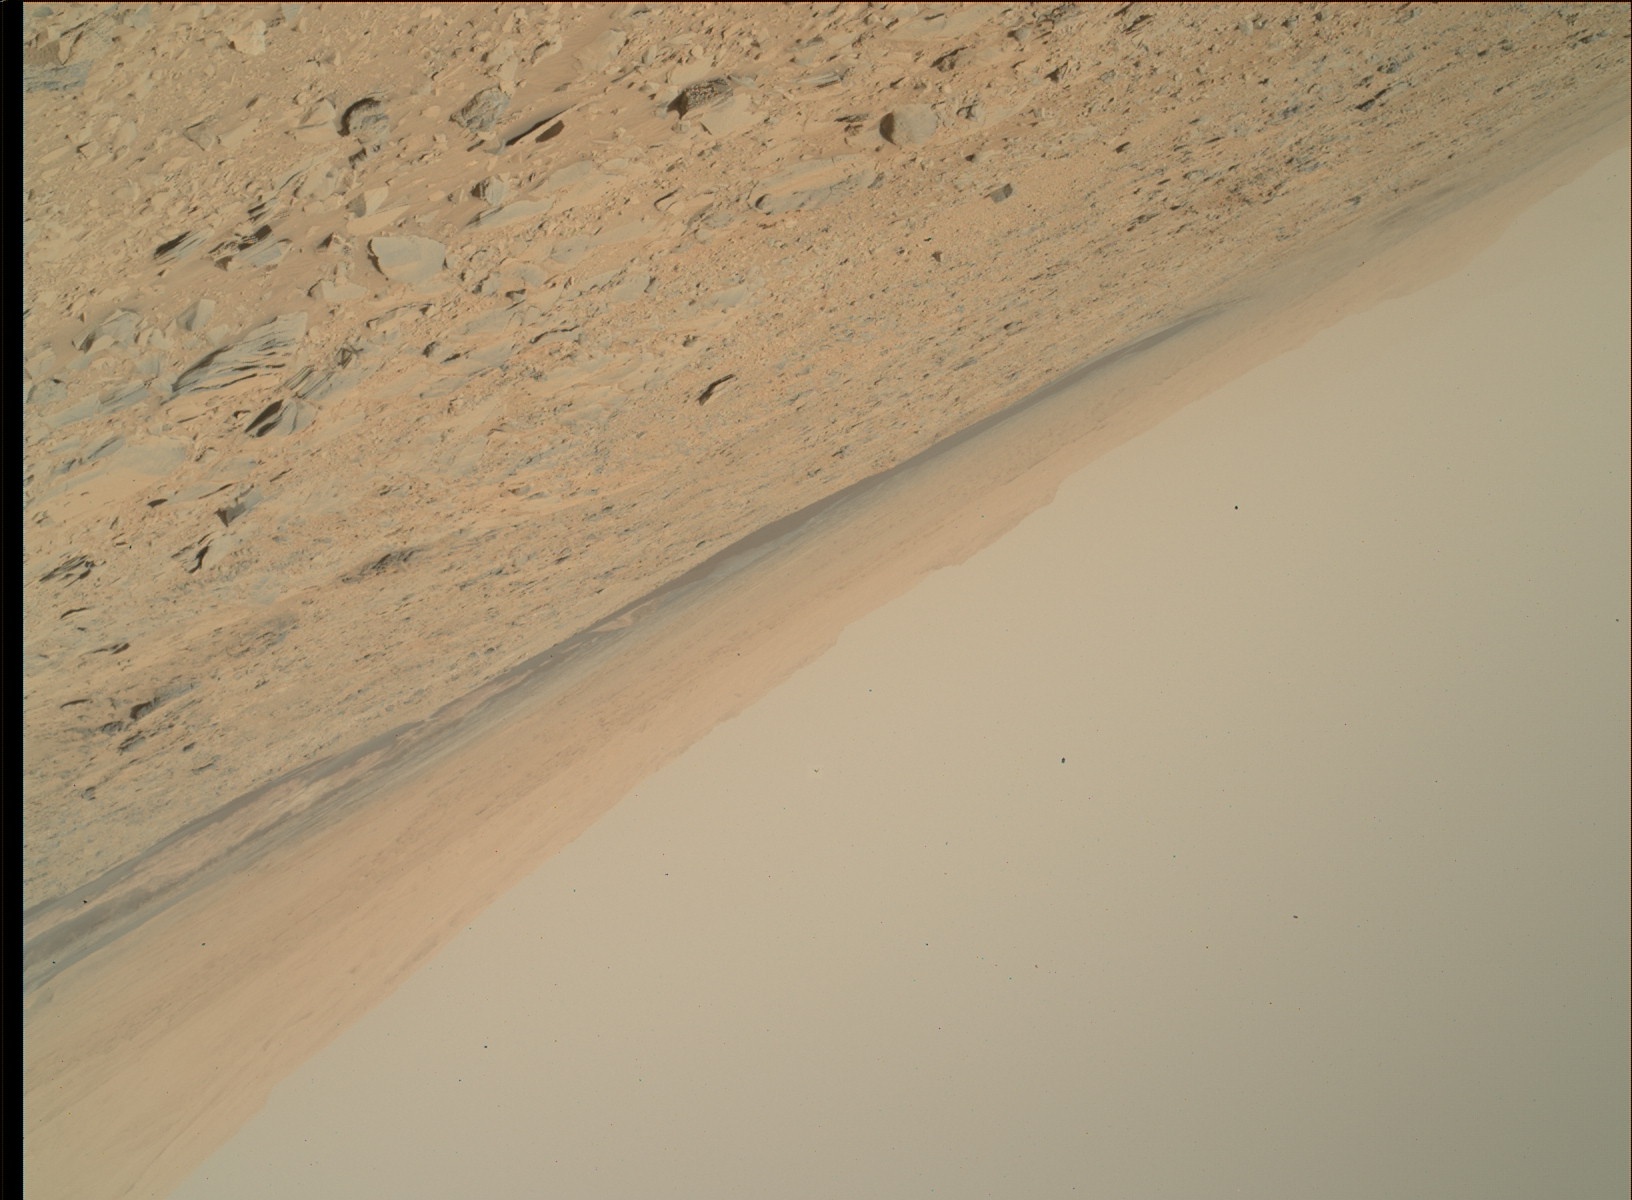 Nasa's Mars rover Curiosity acquired this image using its Mars Hand Lens Imager (MAHLI) on Sol 436